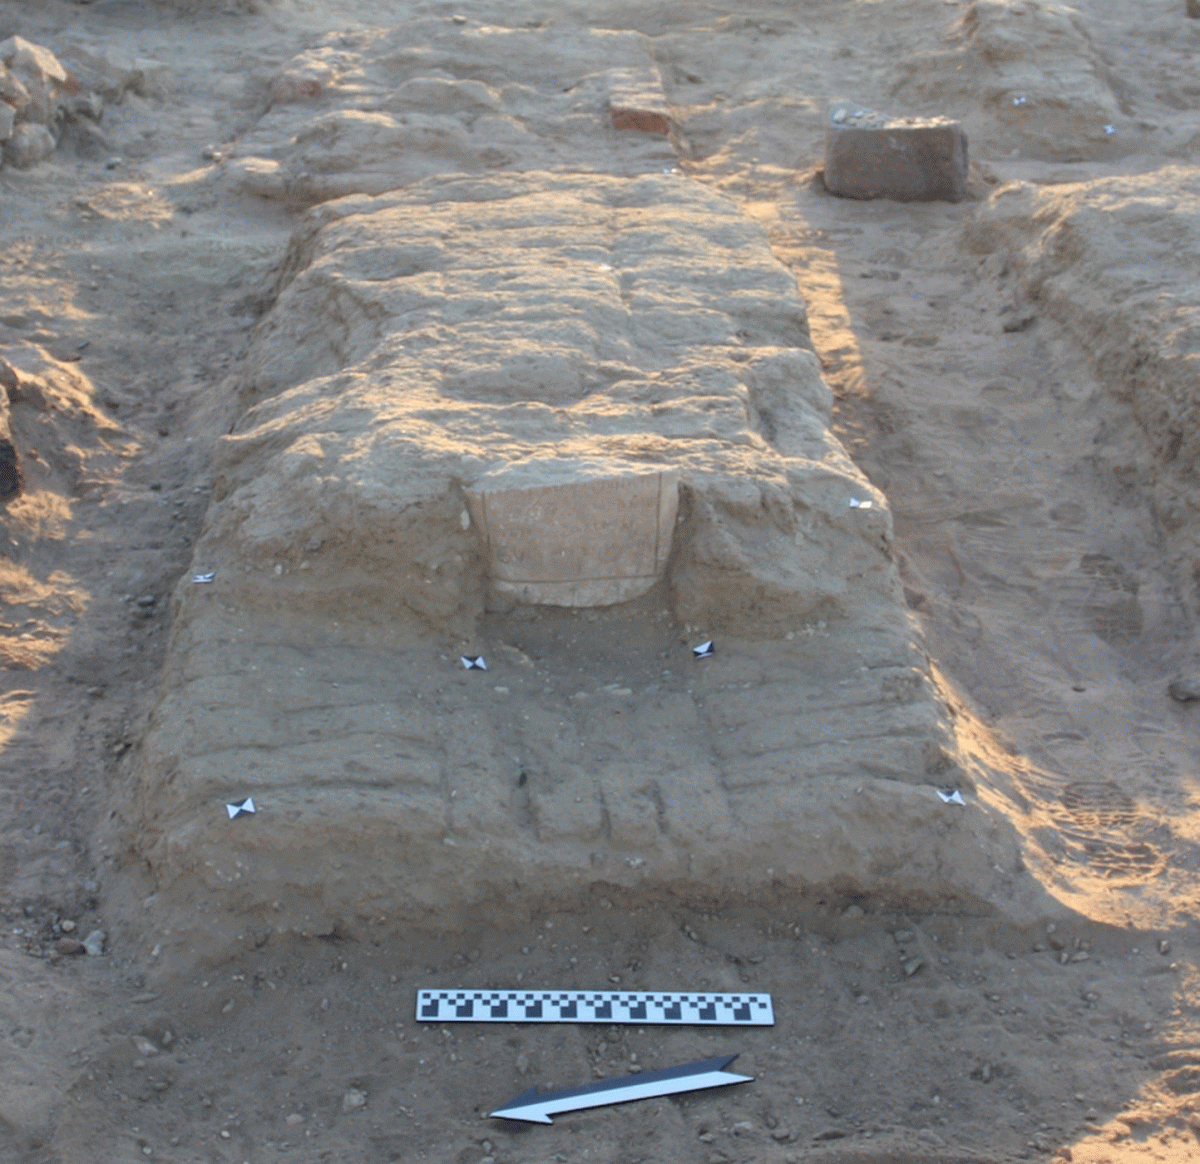 This photo shows one of the stone structures with a tombstone located above the surface of a burial. The tombstones are written in either Greek or Coptic. Photo Credit: LiveScience/Artur Obluski.